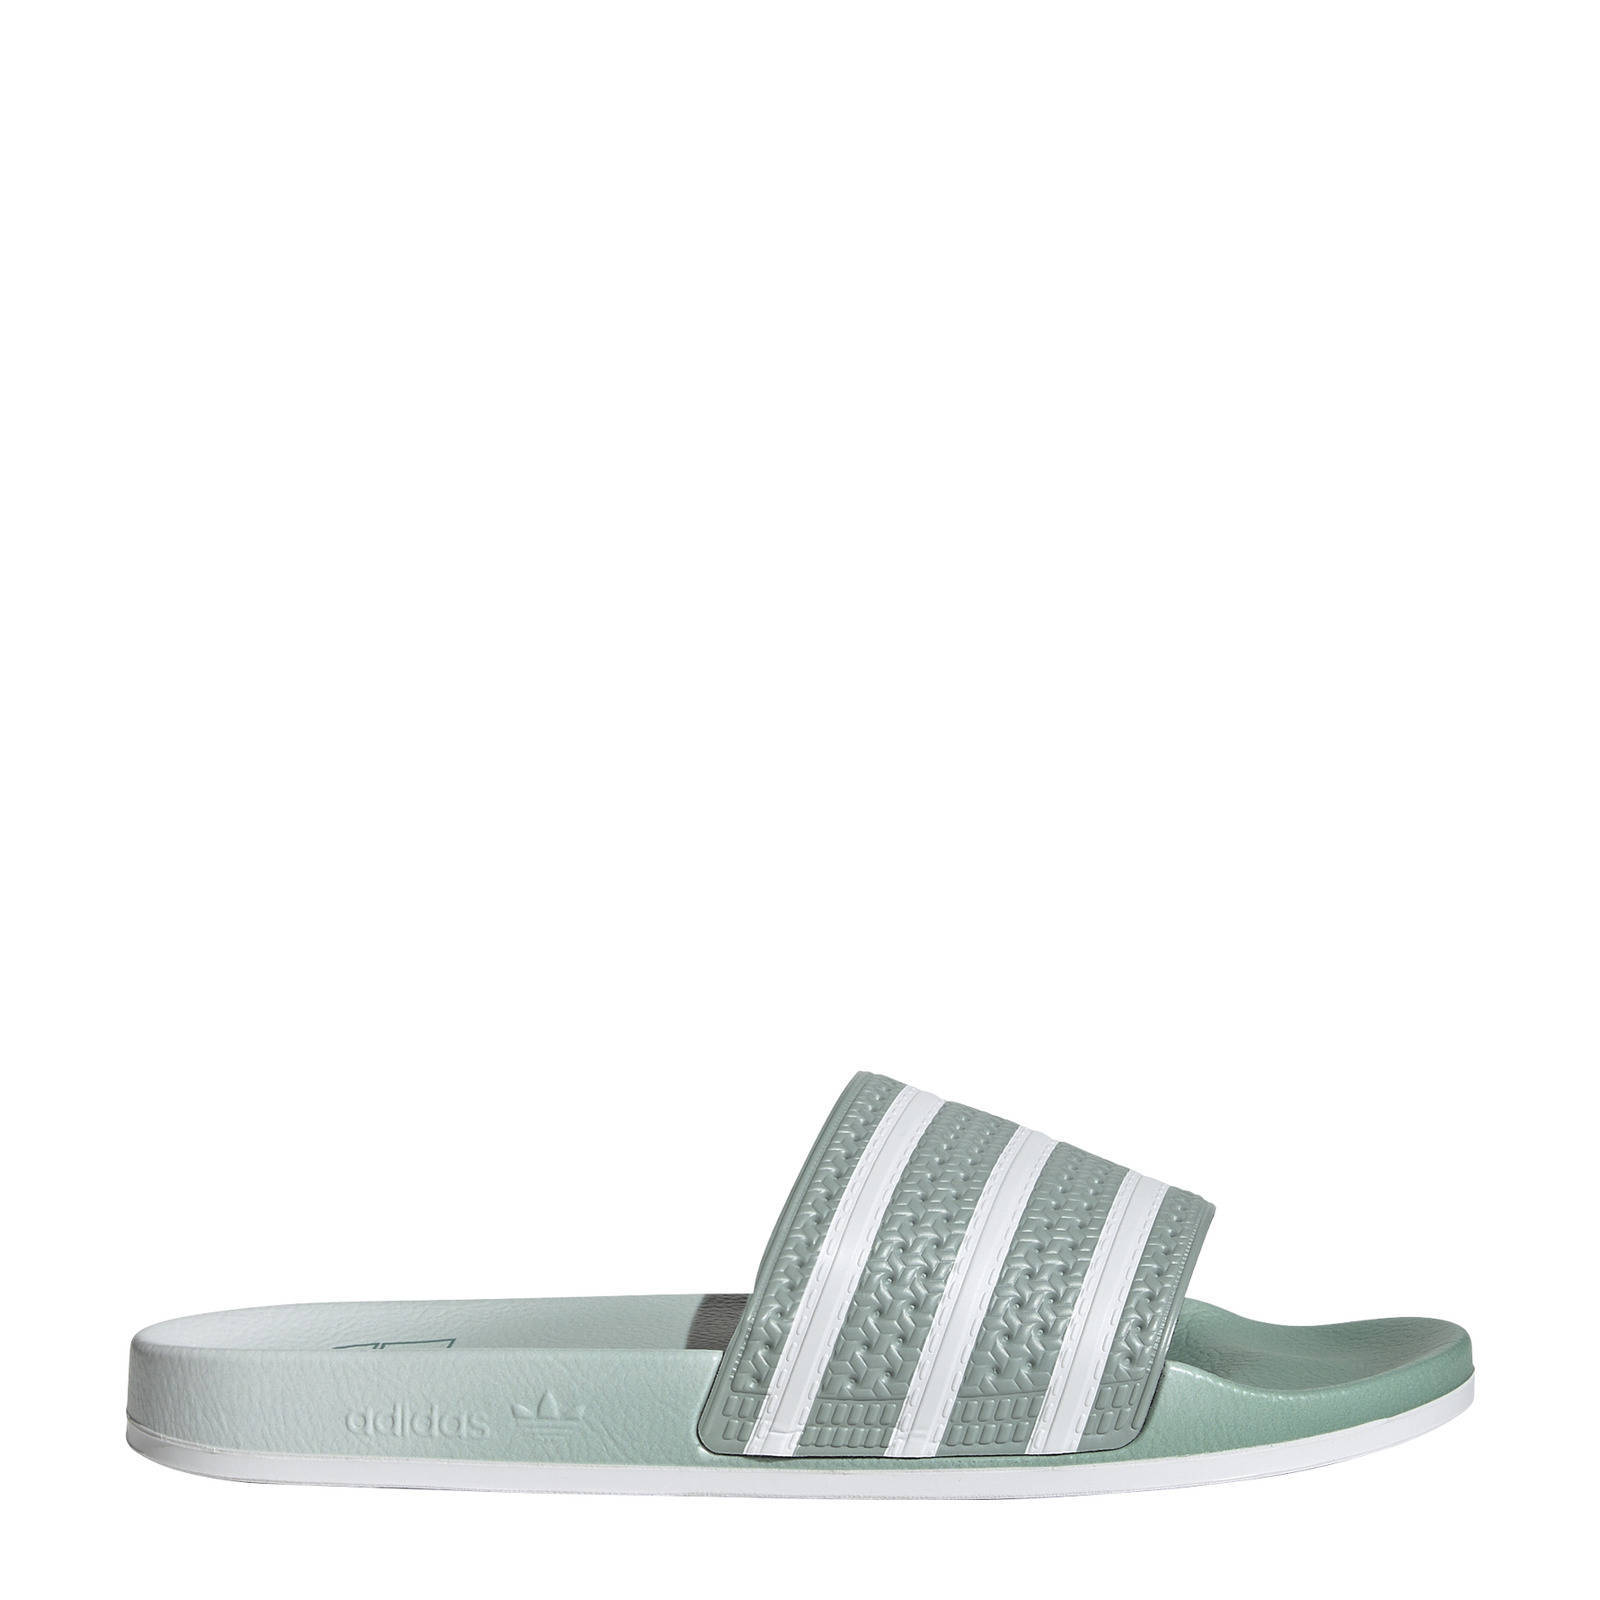 adidas slippers sale dames> OFF-56%